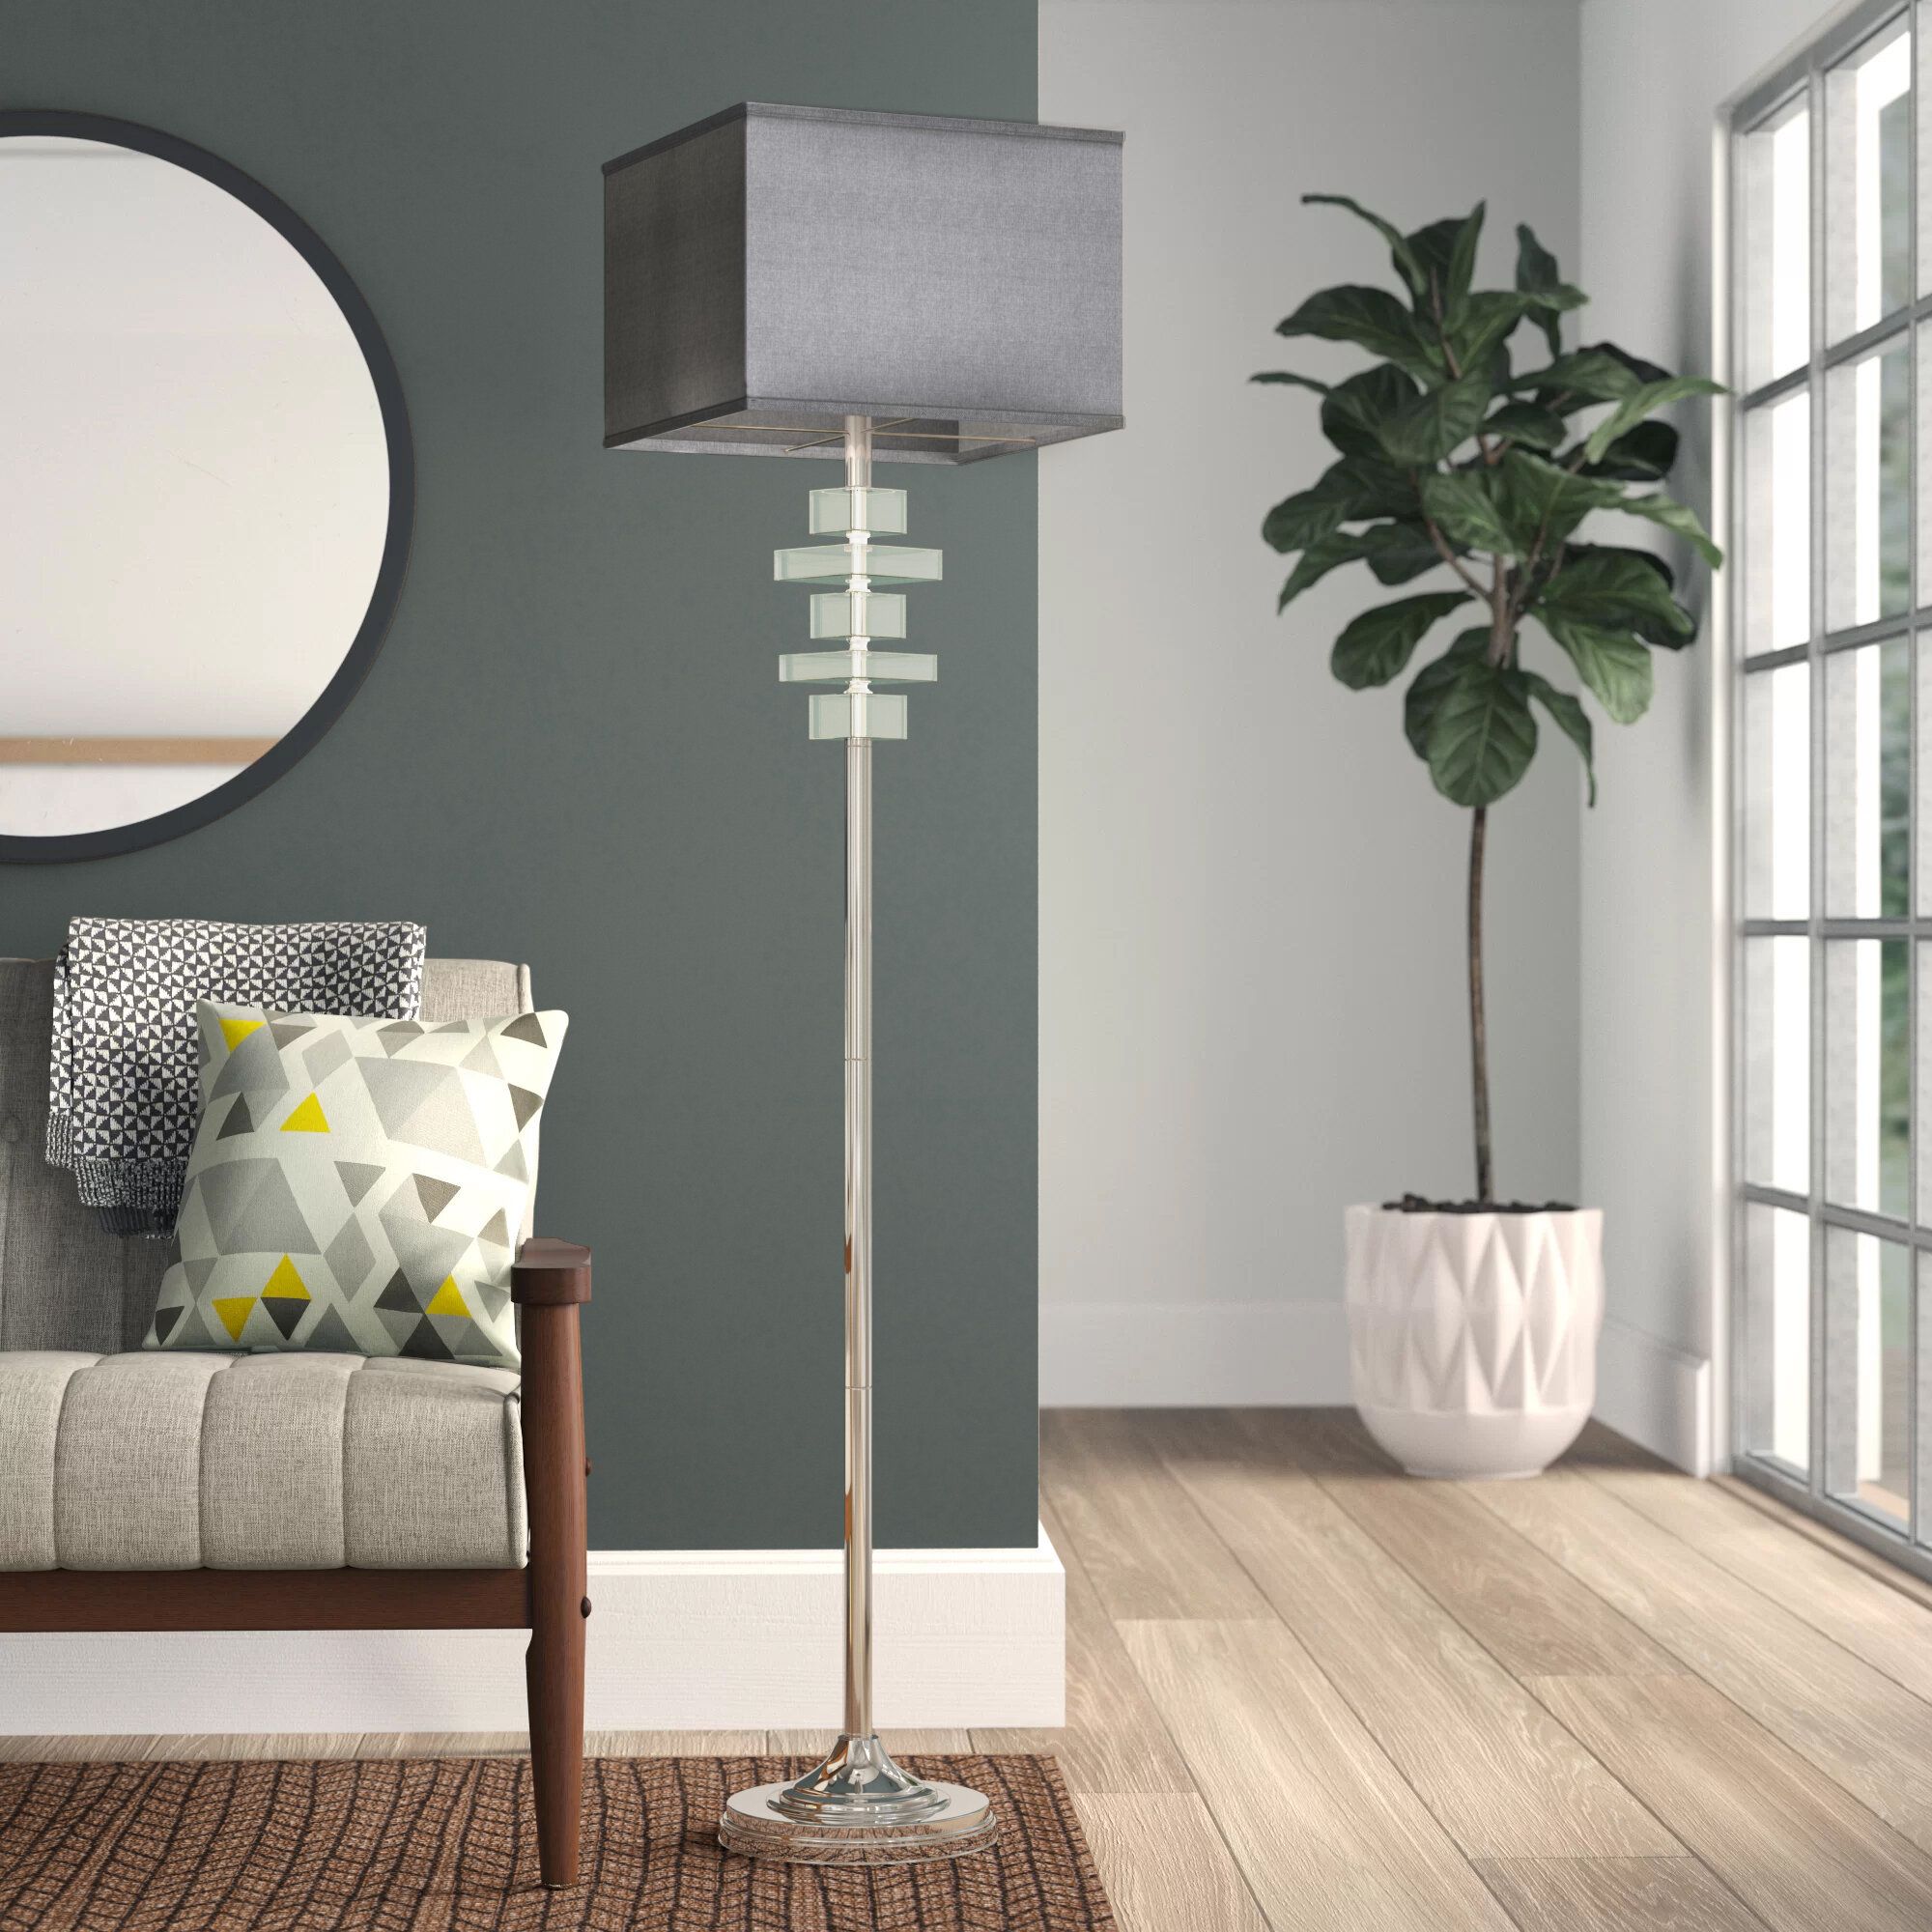 Wayfair | Gray Shade Floor Lamps You'll Love In 2023 With Charcoal Grey Floor Lamps (View 12 of 15)